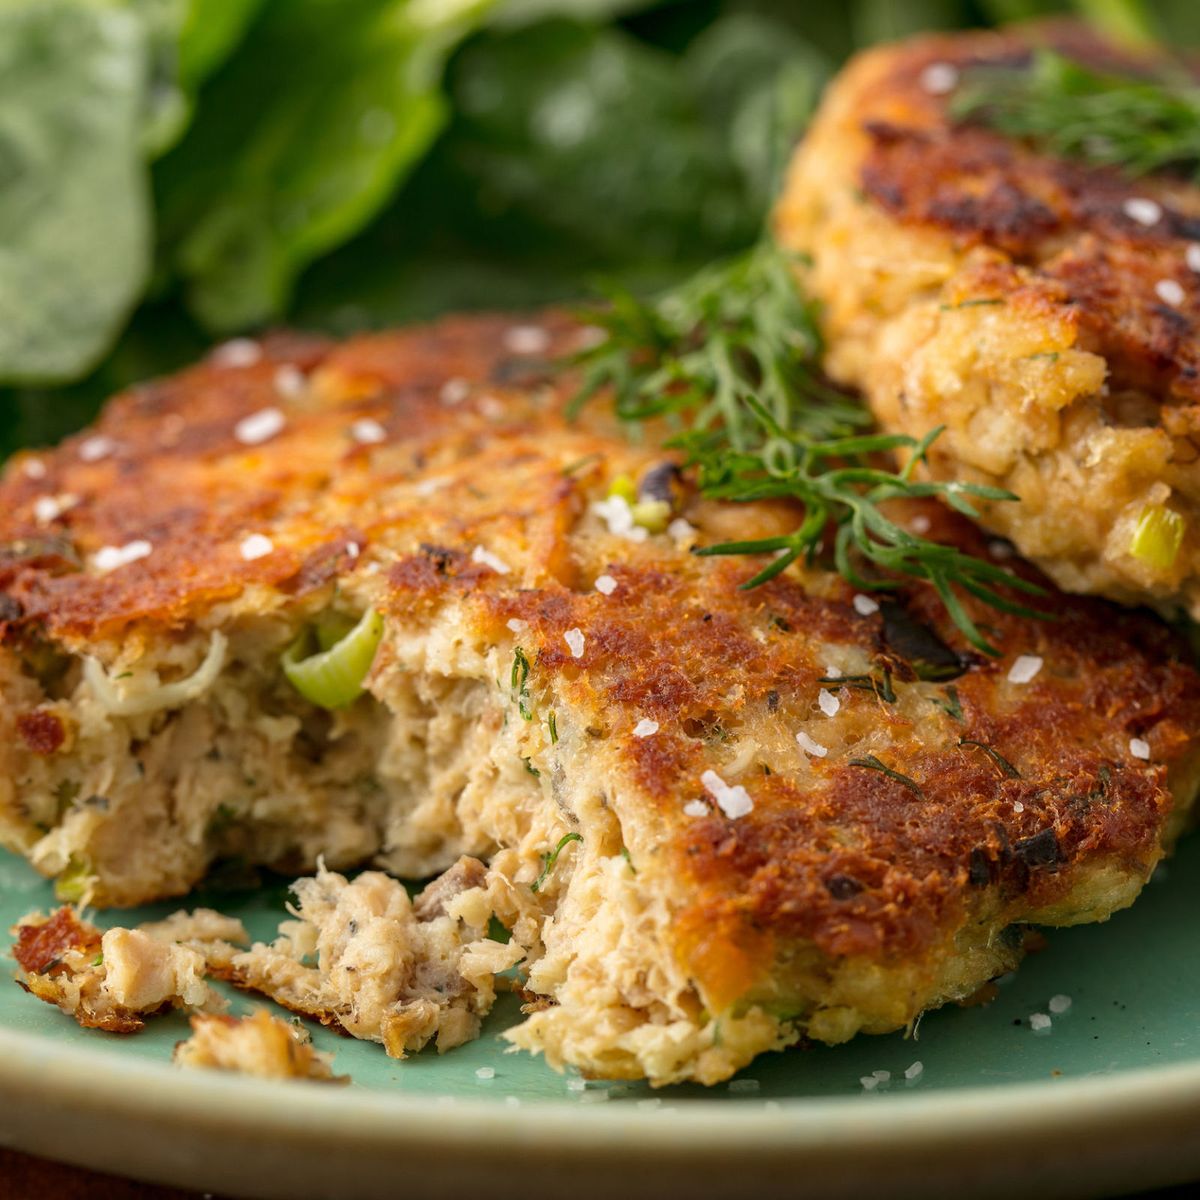 EASY Salmon Burgers Recipe - How to Cook Salmon Burgers Perfectly!